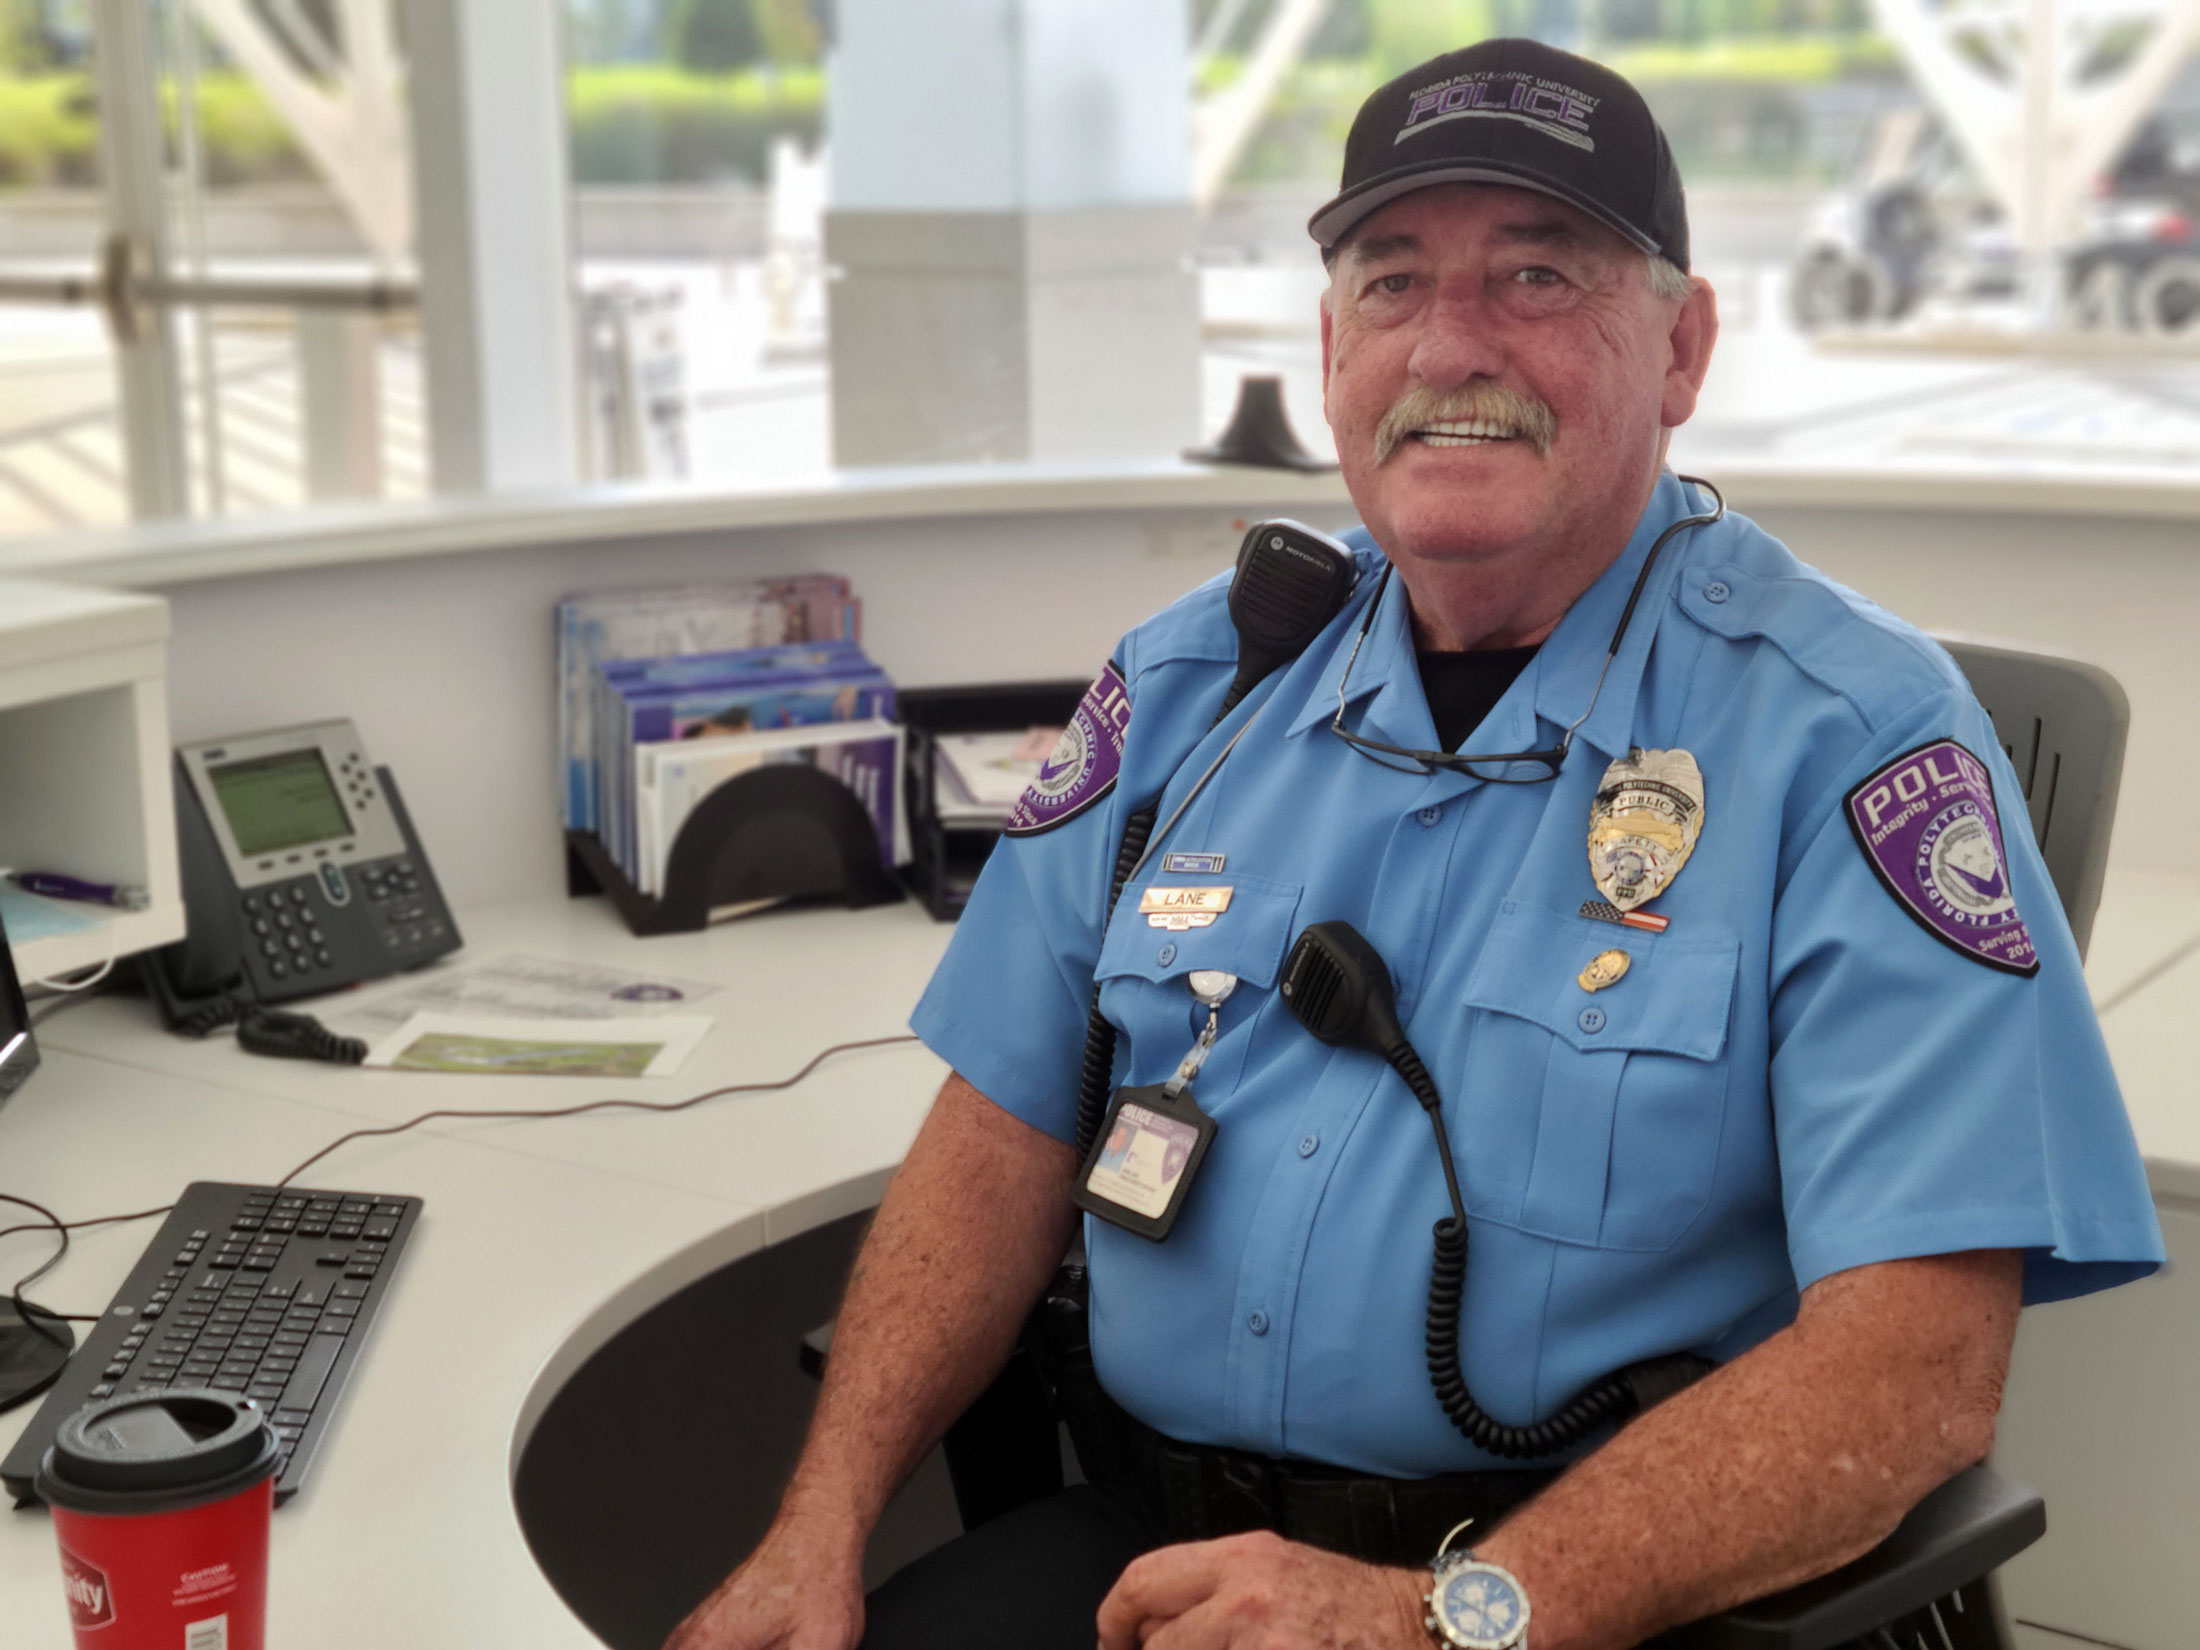 Public safety officer keeps a watchful, helpful eye on campus